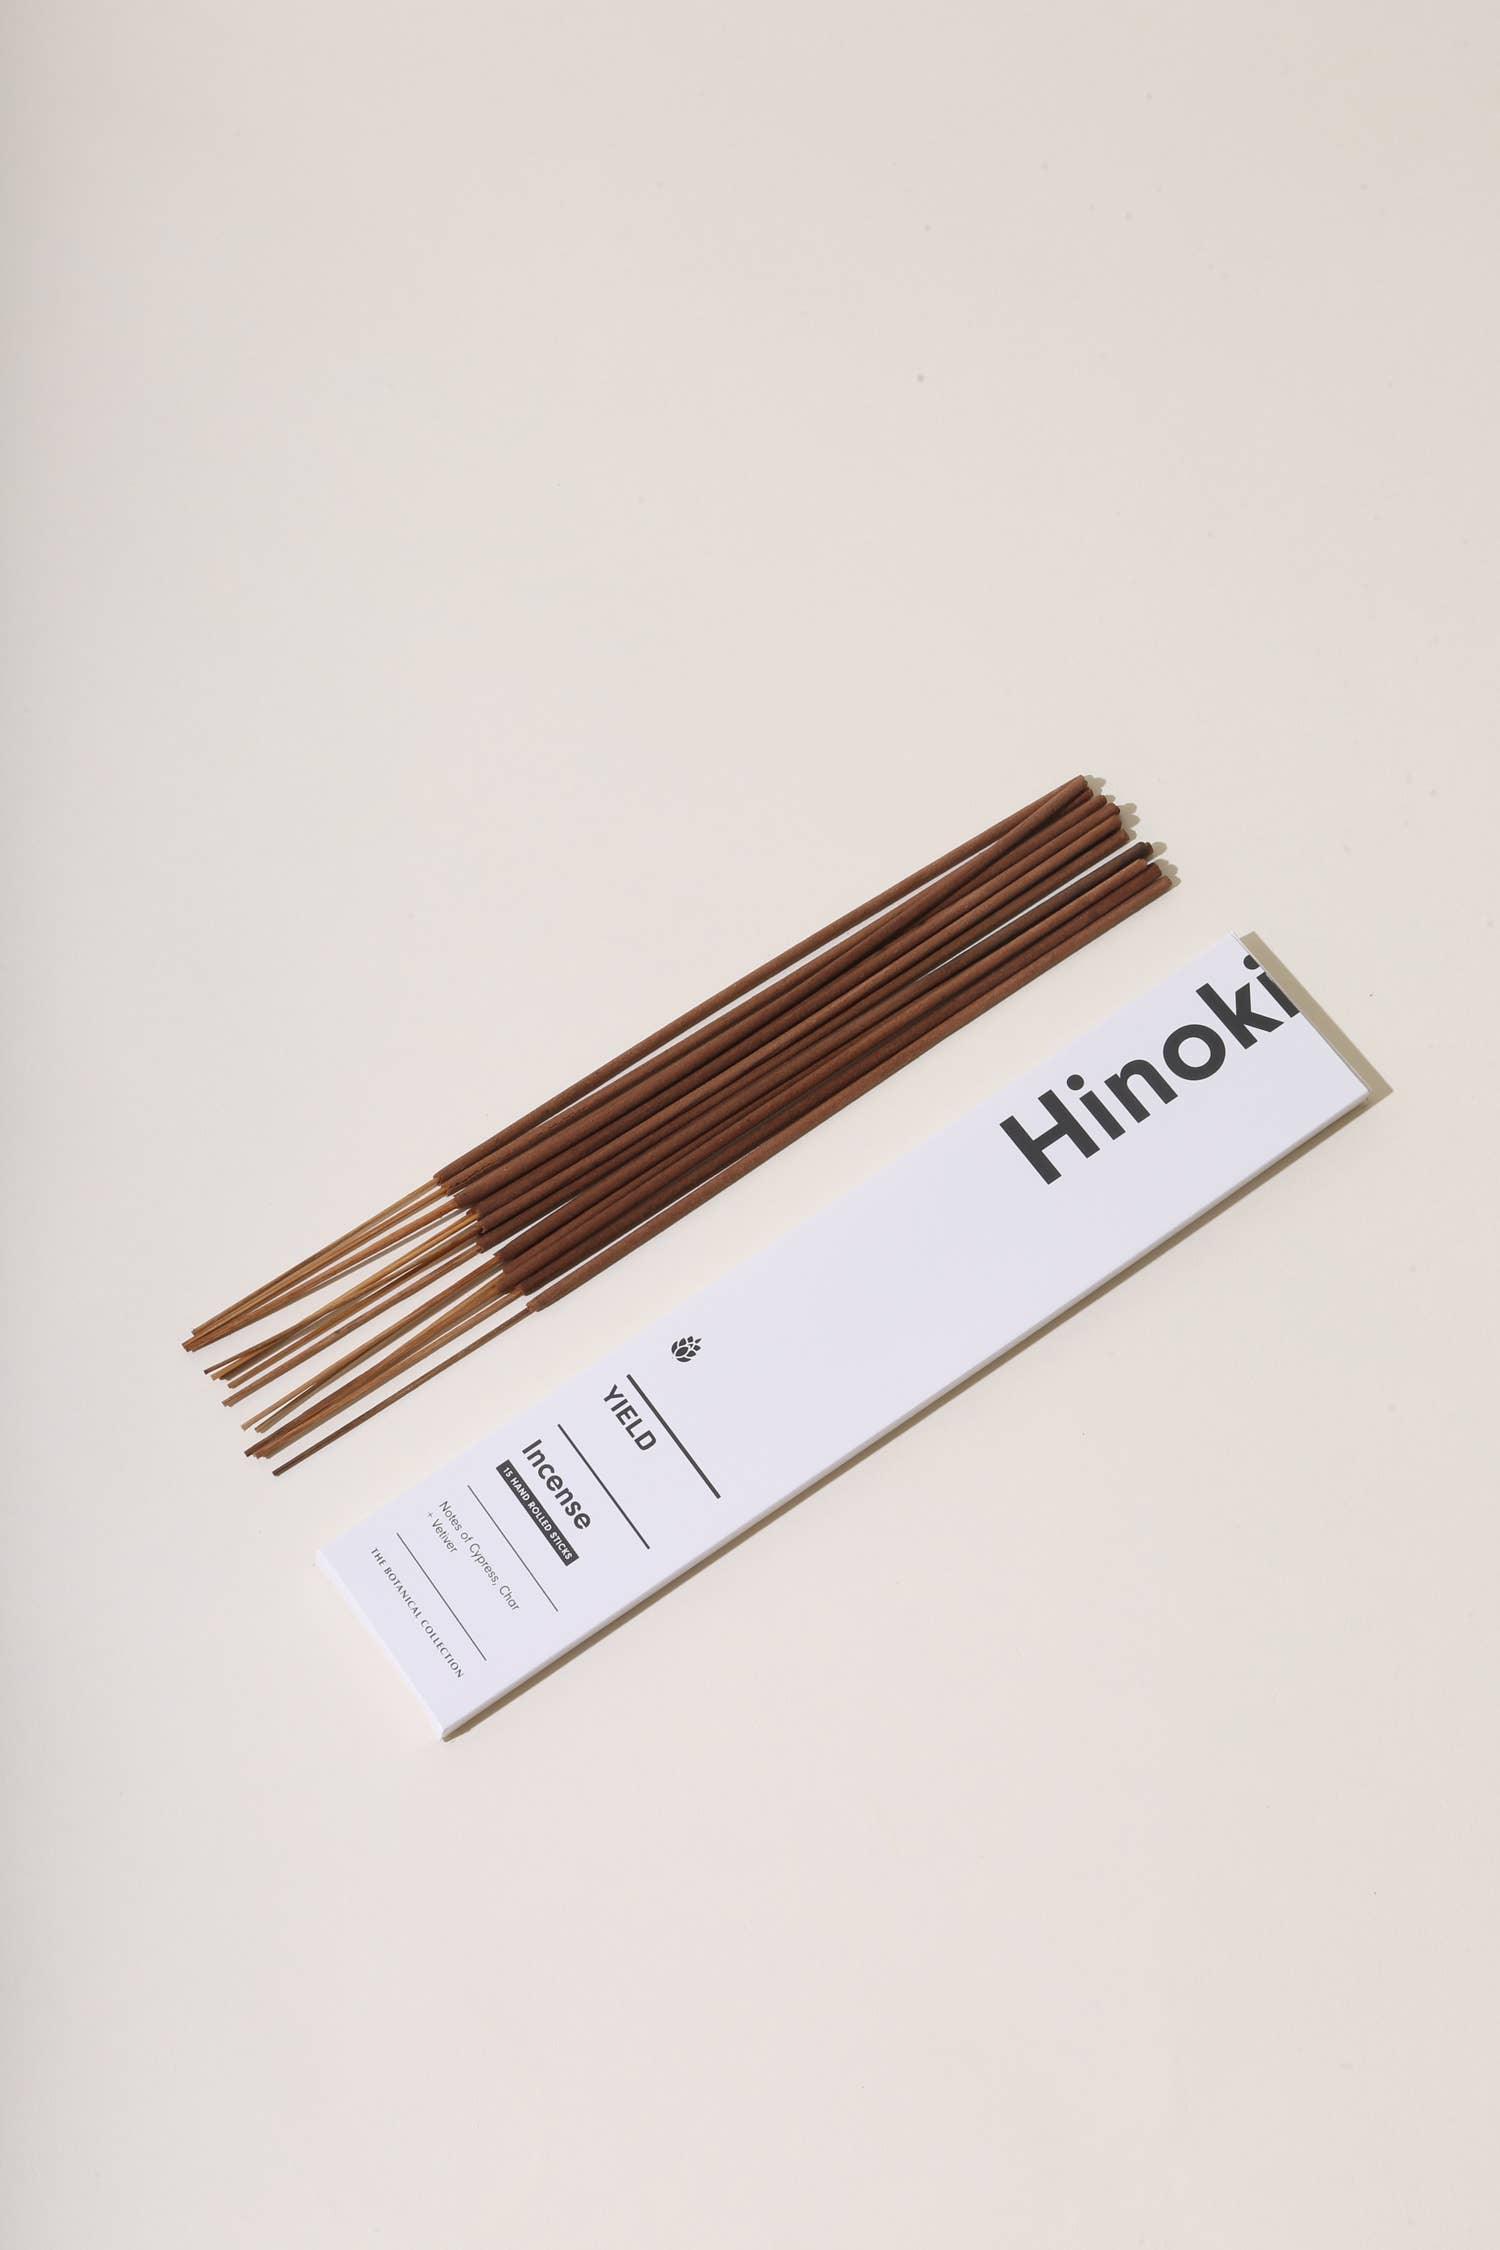 Hinoki Incense by Yield - Haven